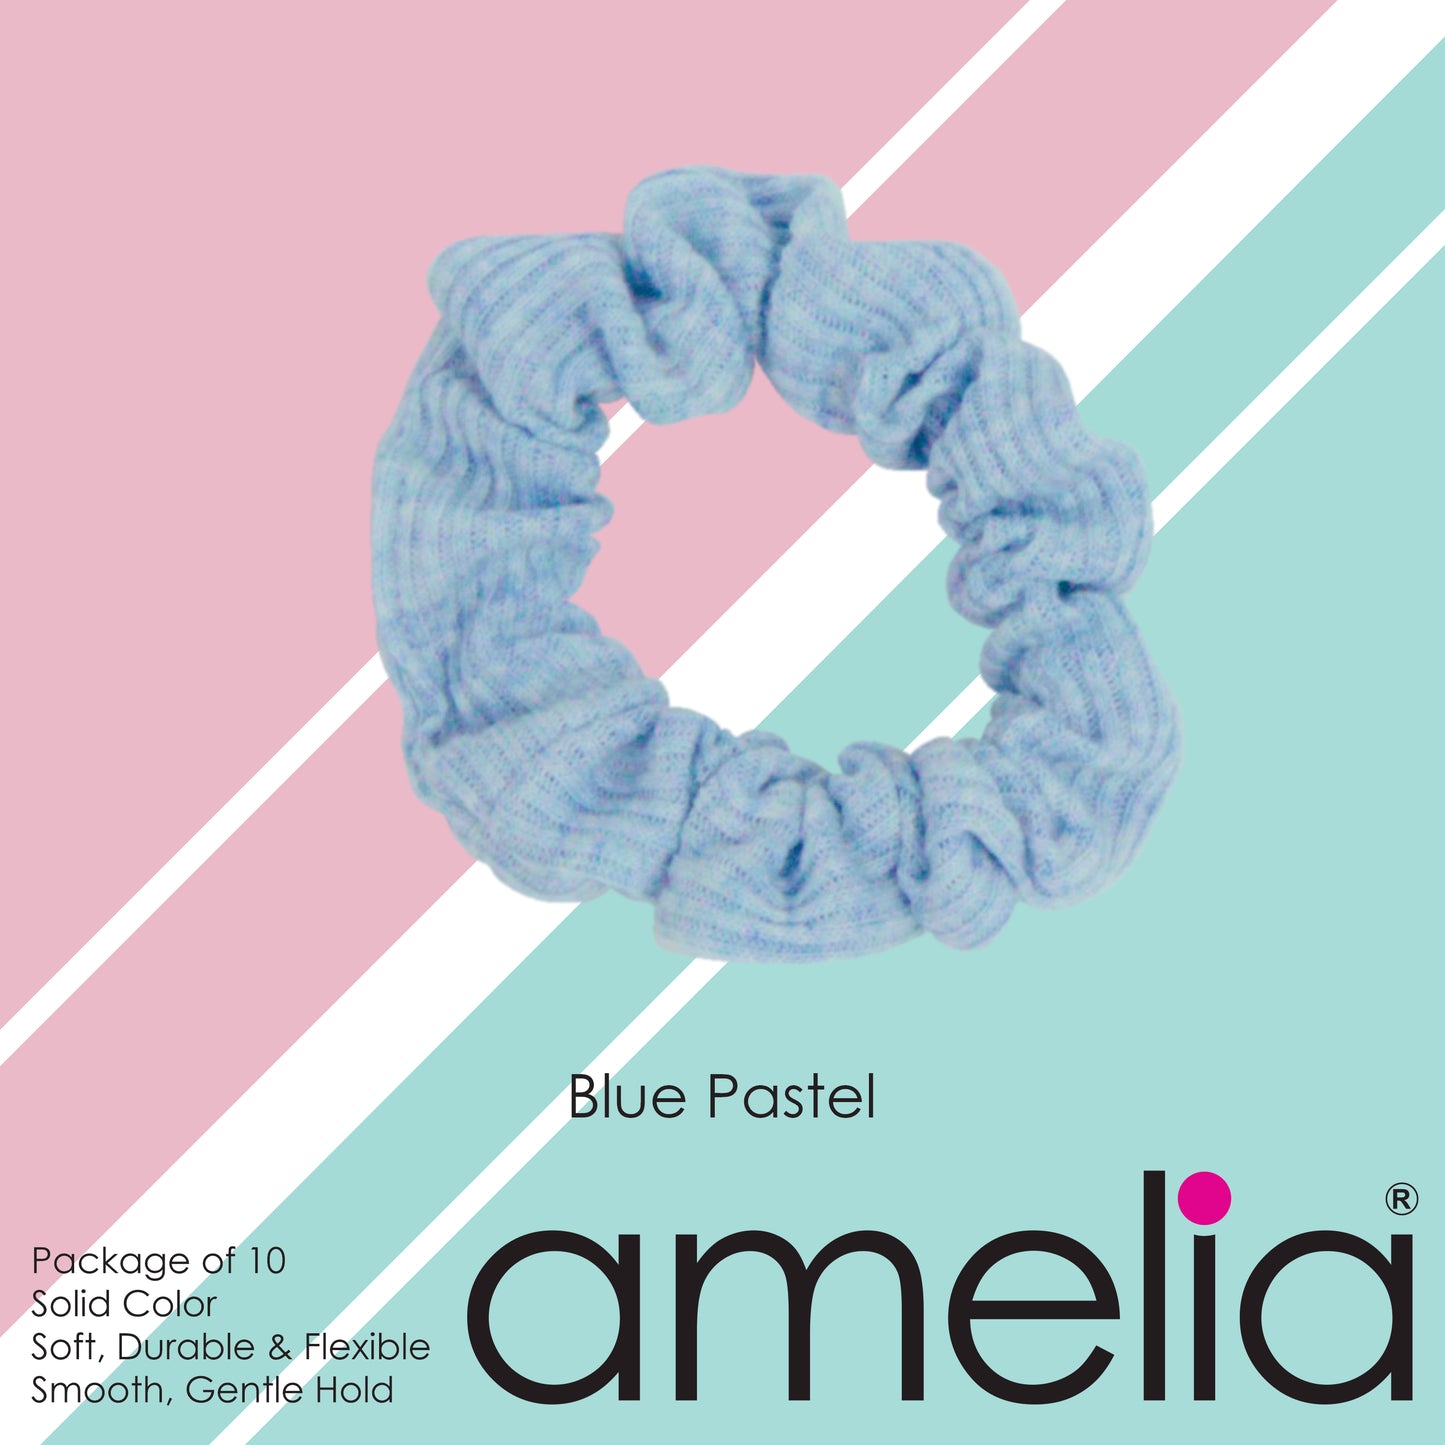 Amelia Beauty, Medium Pastel Blue Ribbed Scrunchies, 2.5in Diameter, Gentle on Hair, Strong Hold, No Snag, No Dents or Creases. 10 Pack